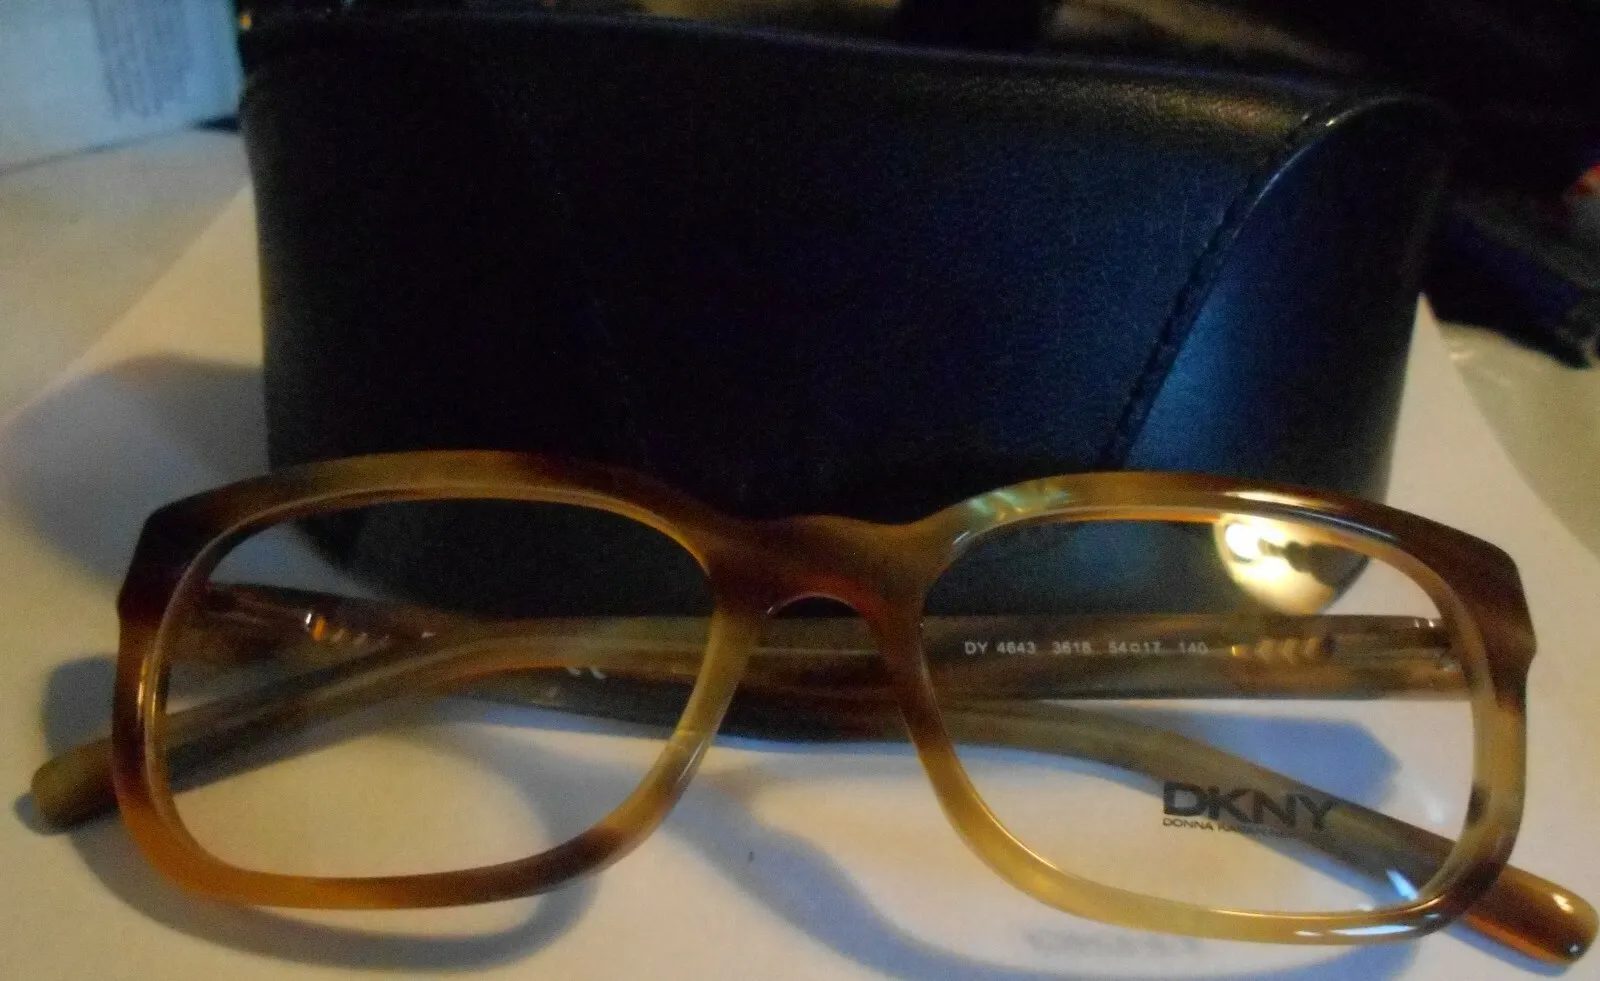 DNKY Glasses/Frames 4643 3616 54 17 140 -new with case - brand new - $25.00